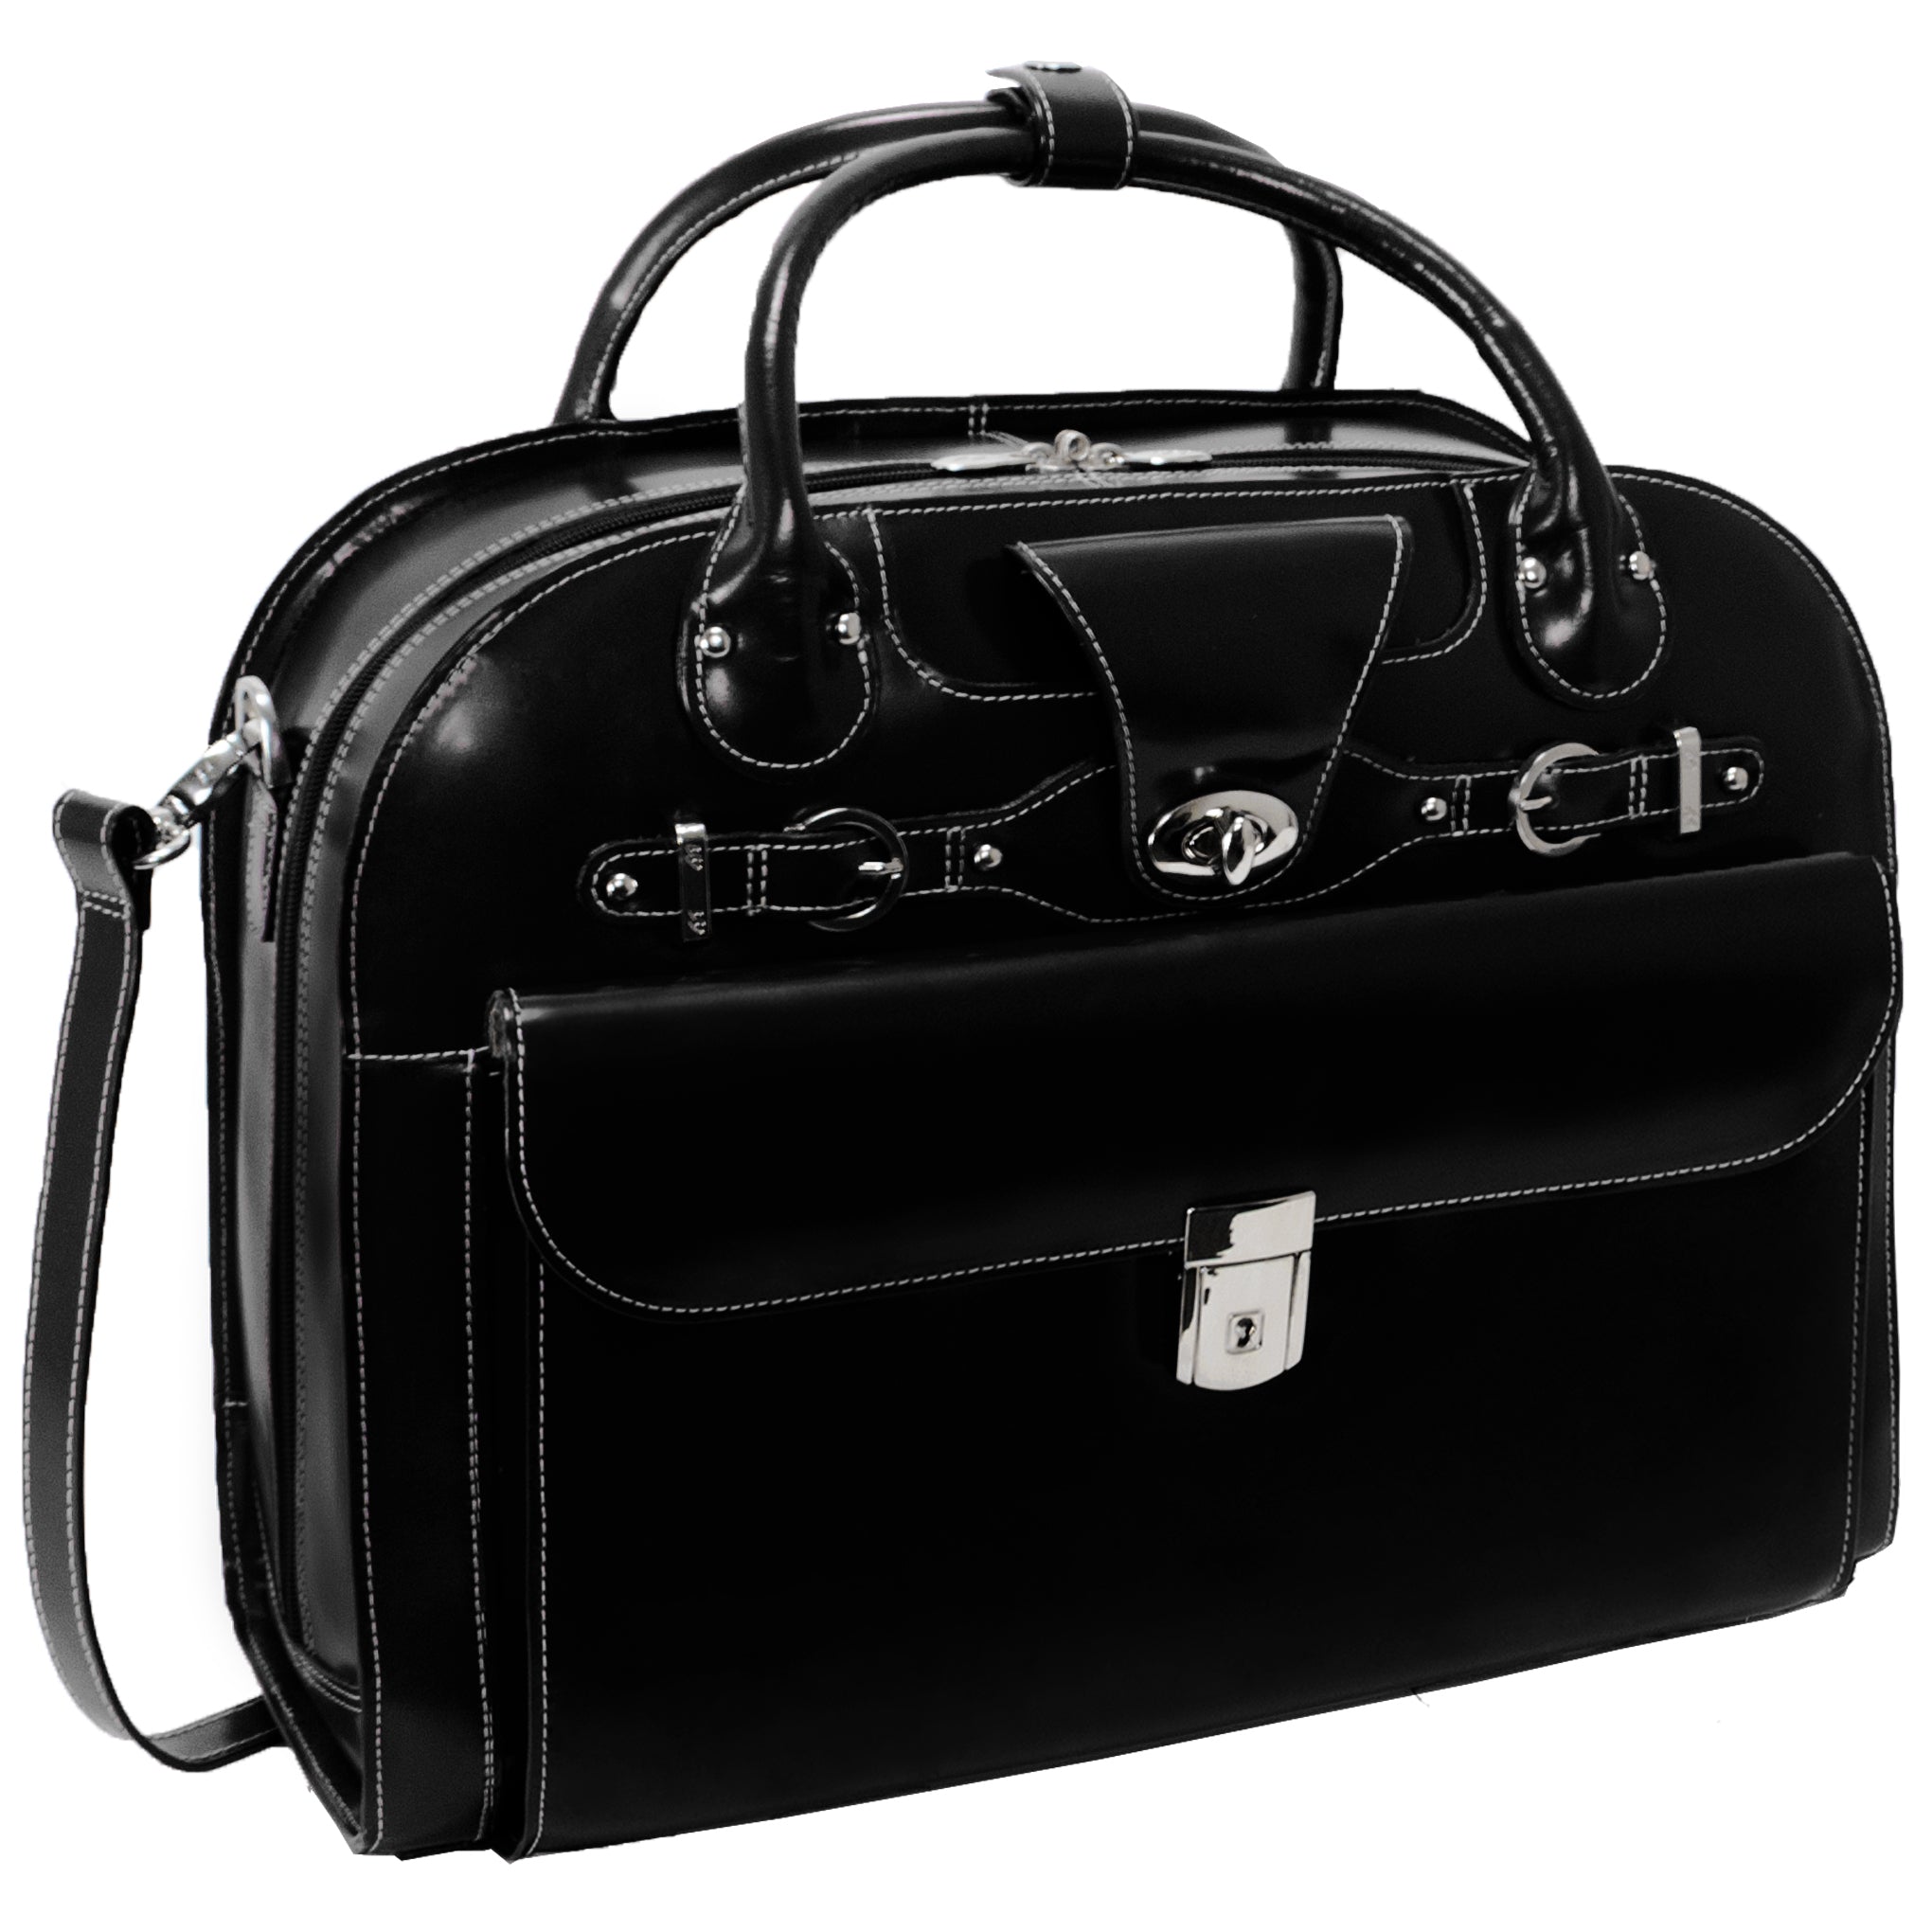 McKlein ROSEVILLE 15" Leather Fly-Through Checkpoint-Friendly Patented Detachable -Wheeled Laptop Briefcase